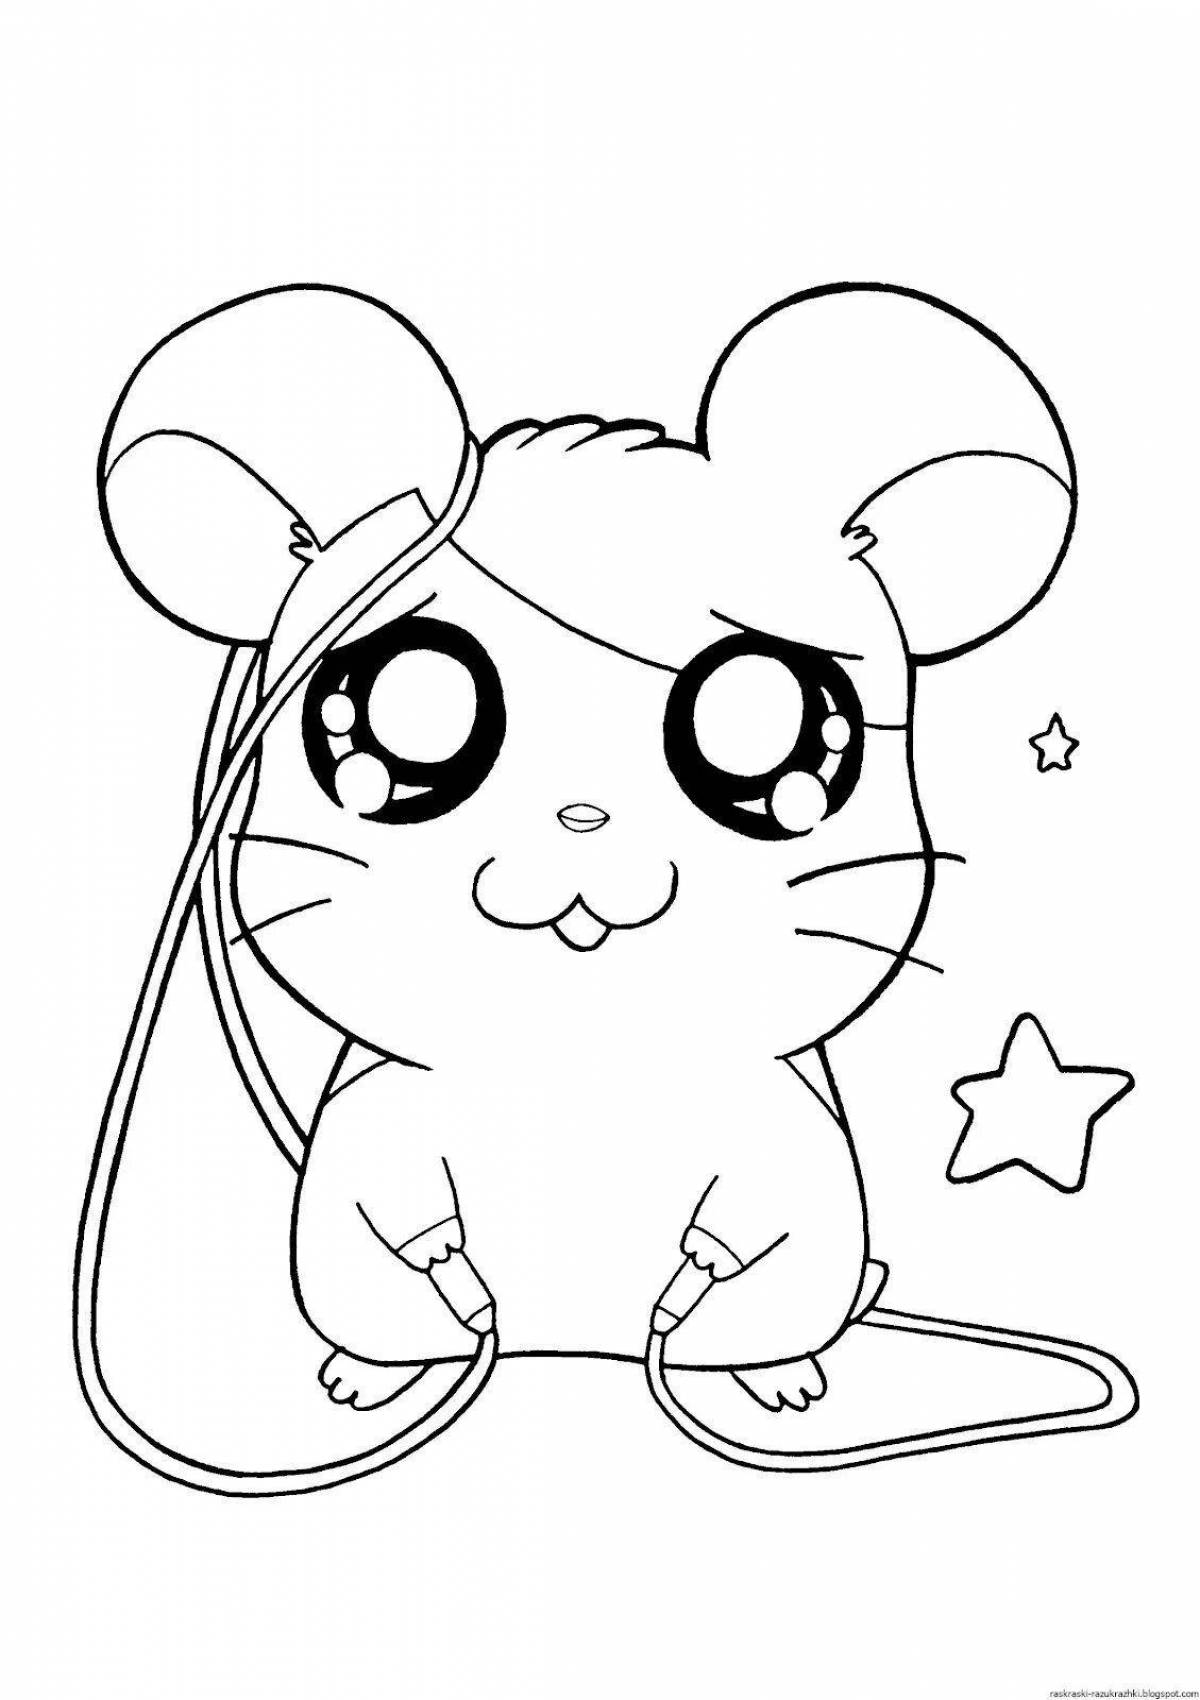 Adorable mouse coloring pages